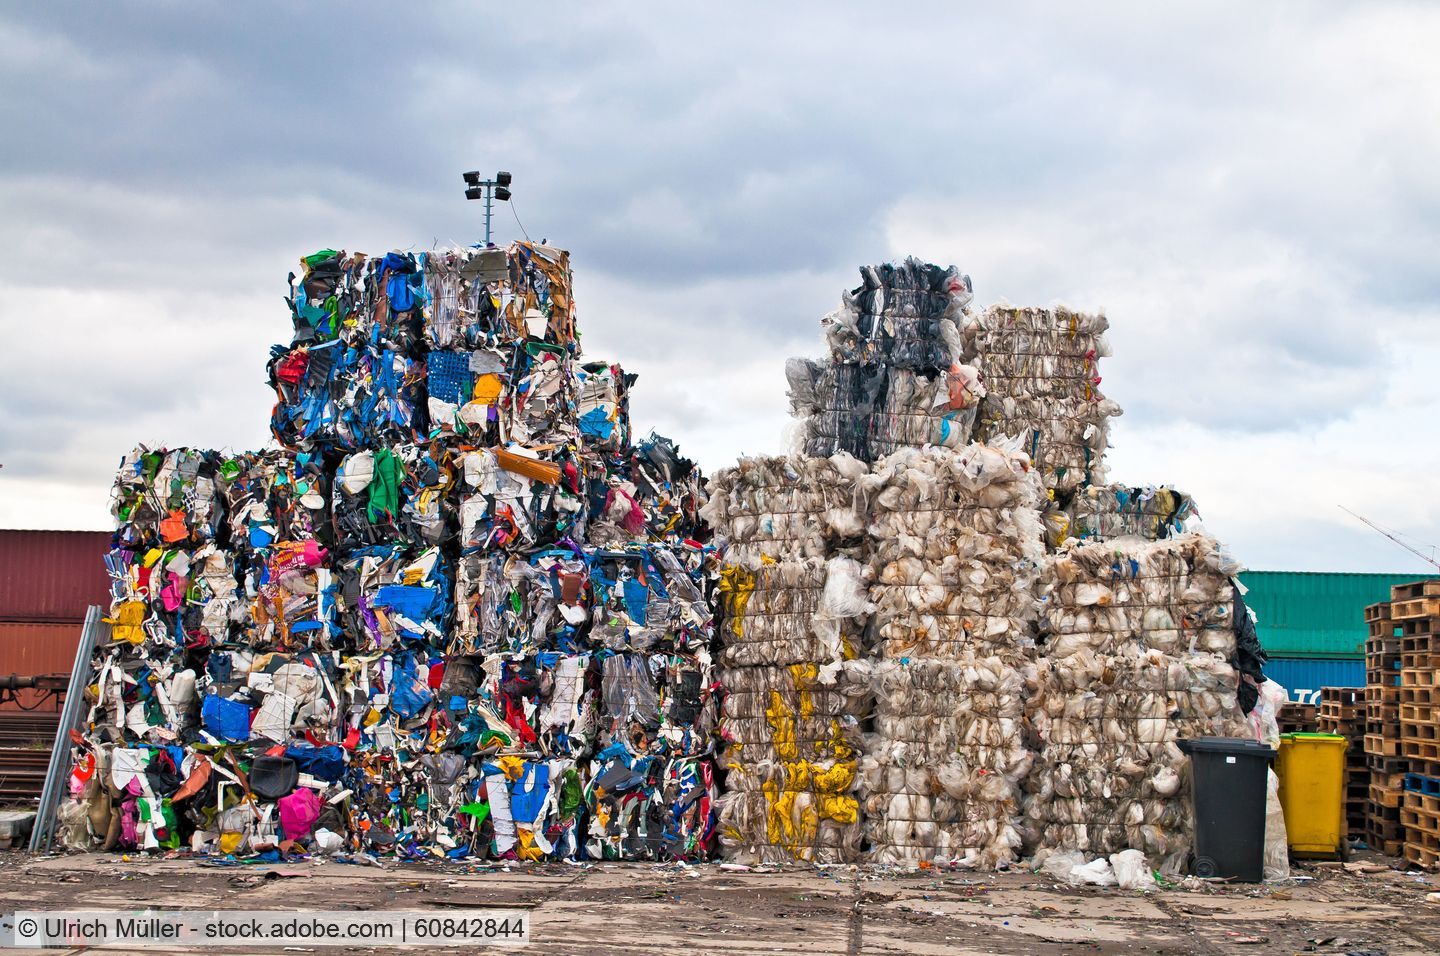 Stacked bales of waste plastic awaiting transport